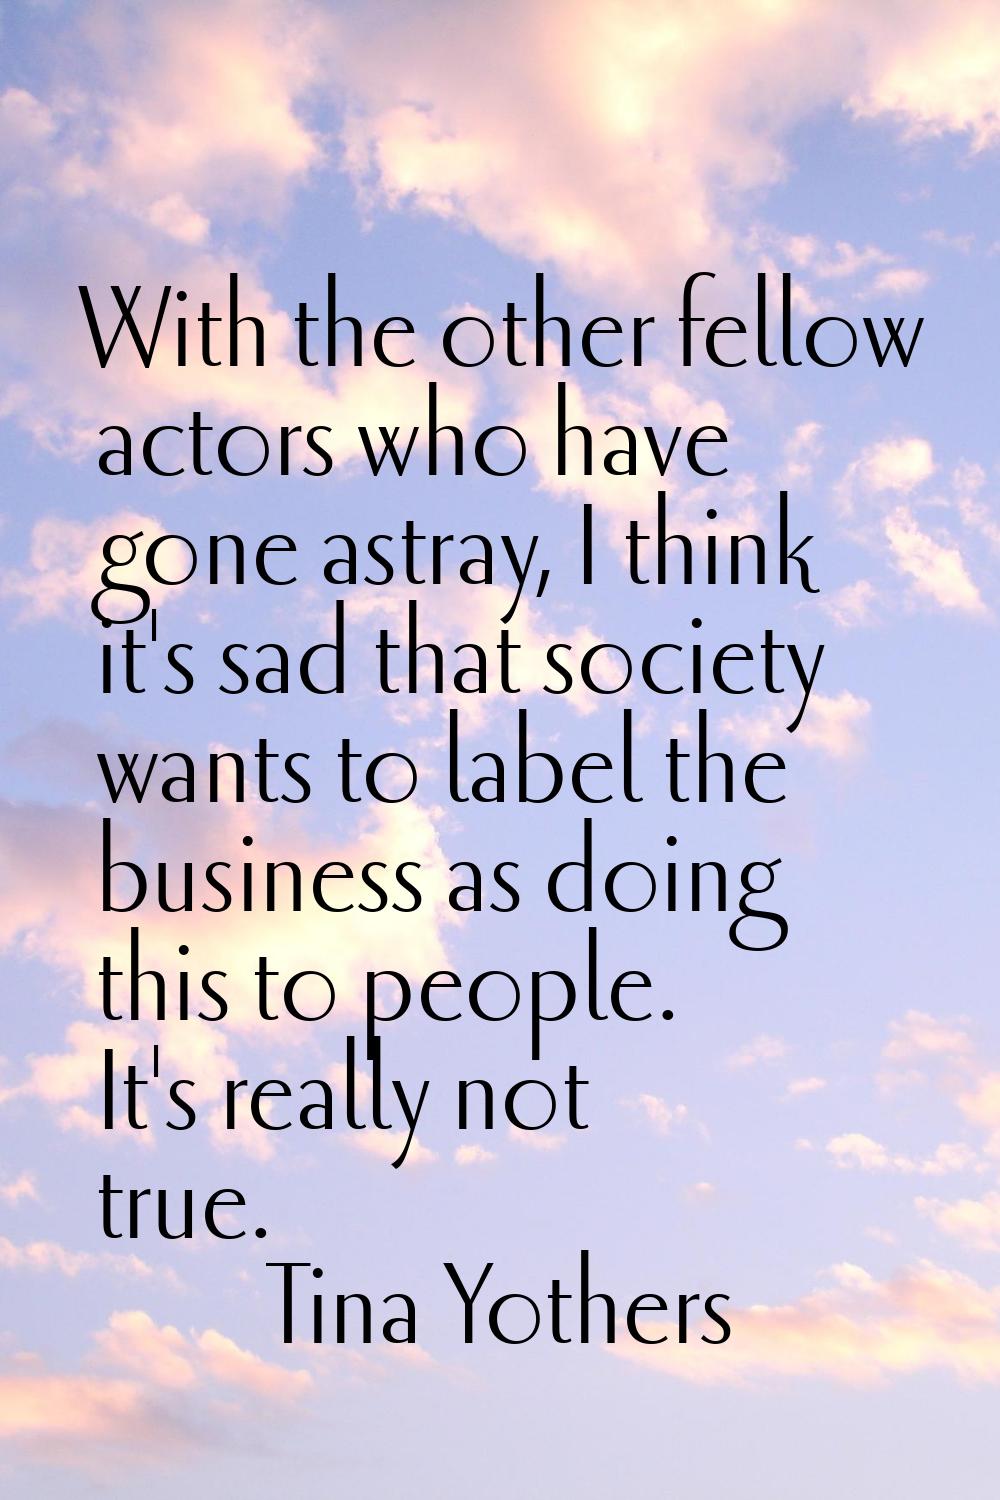 With the other fellow actors who have gone astray, I think it's sad that society wants to label the